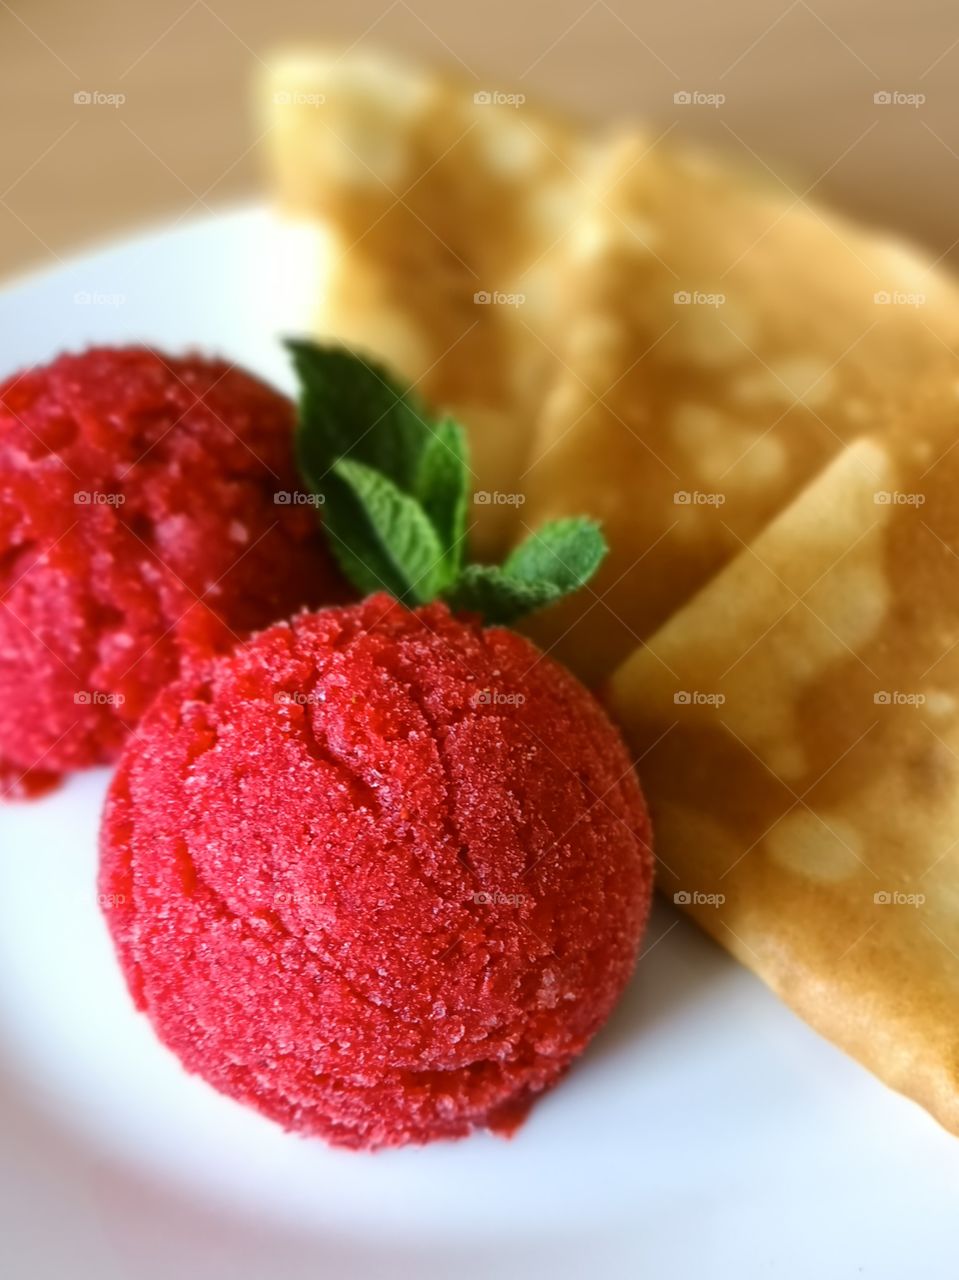 Homemade pancakes with strawberry sorbet and mint